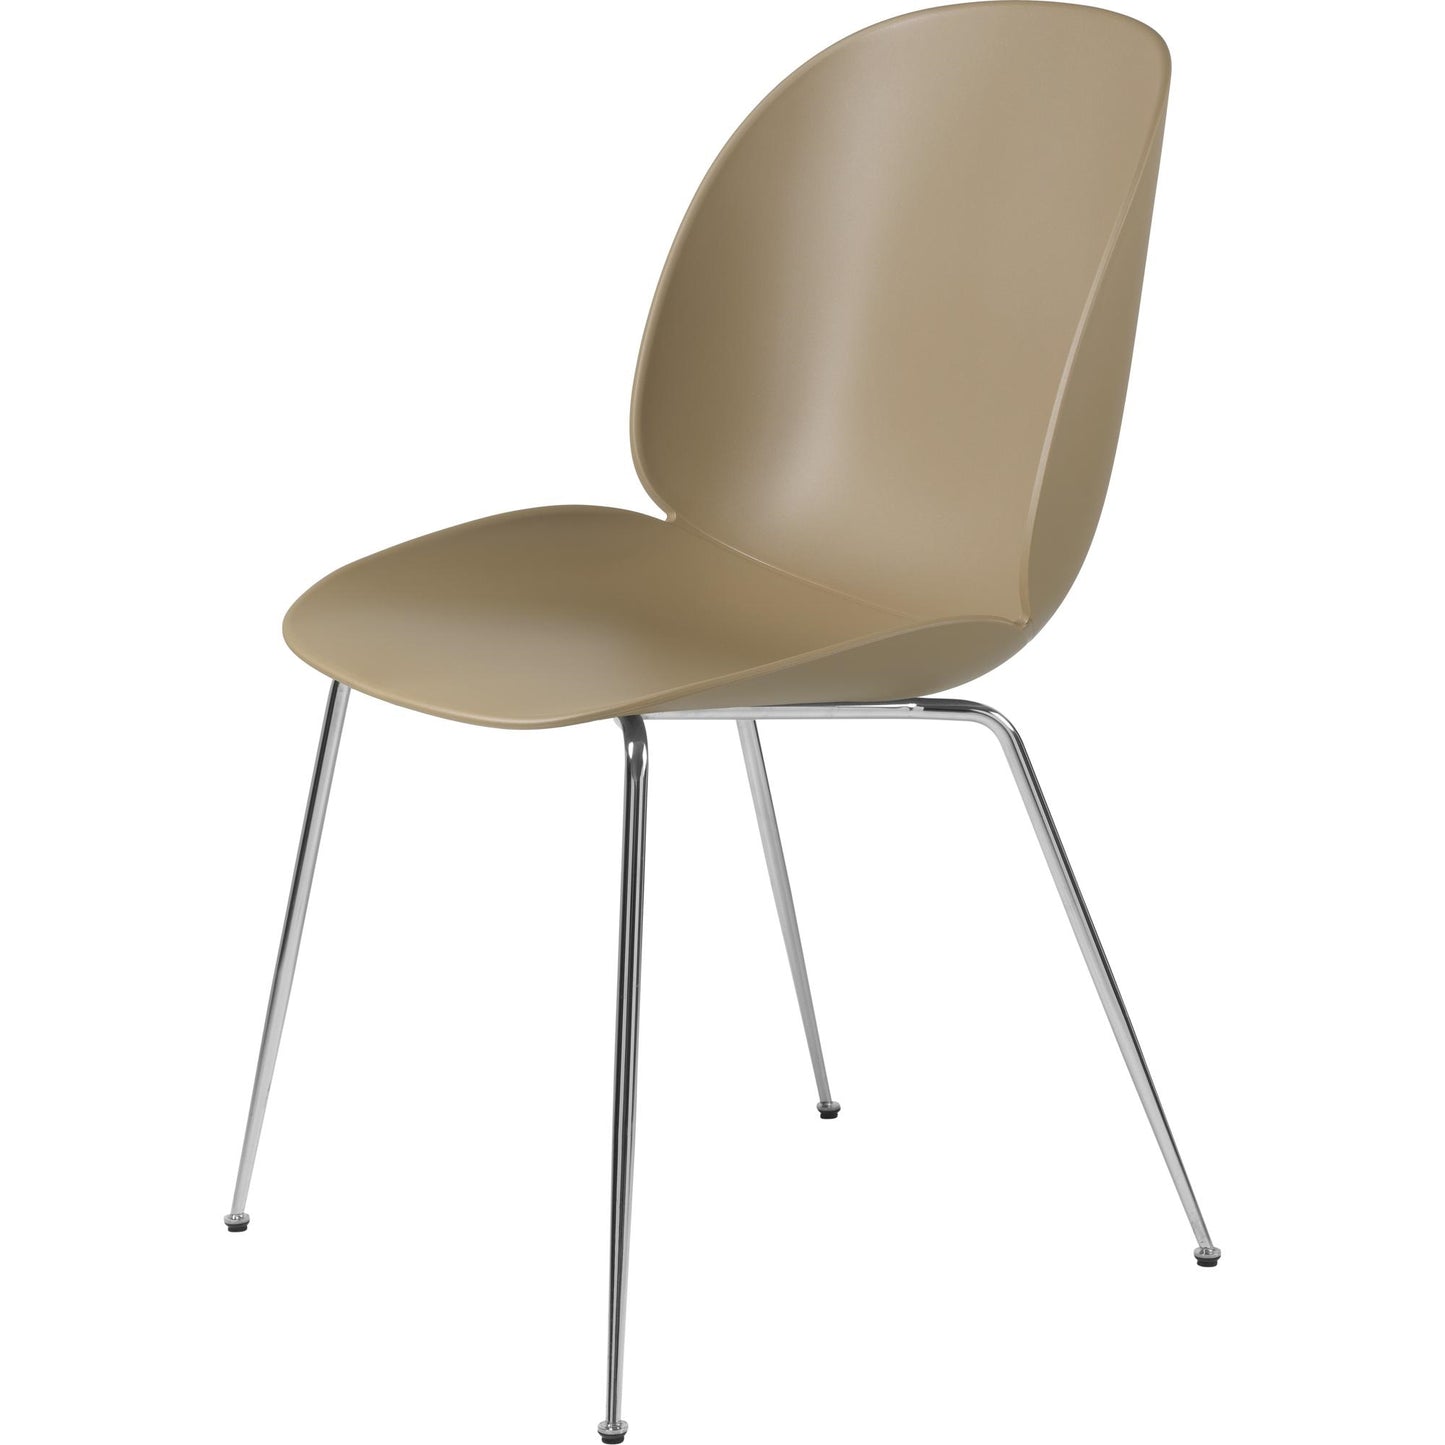 Beetle Dining Chair Conic Base Chrome by GUBI #Chrome/ Pebble Brown